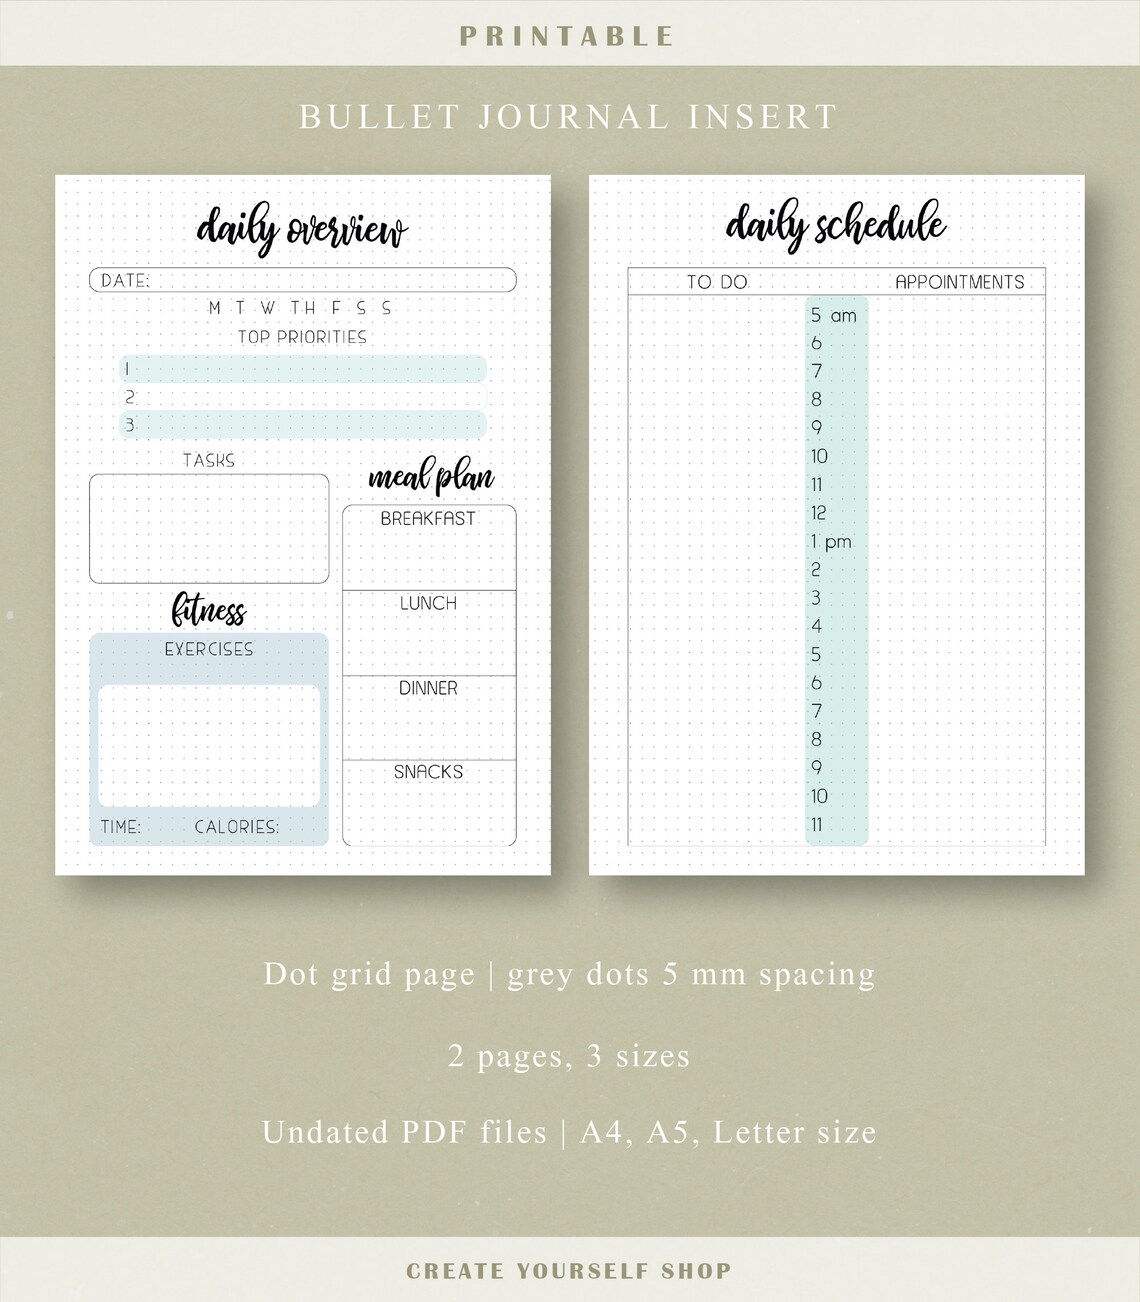 Printable daily bullet journal daily log daily planner | Etsy